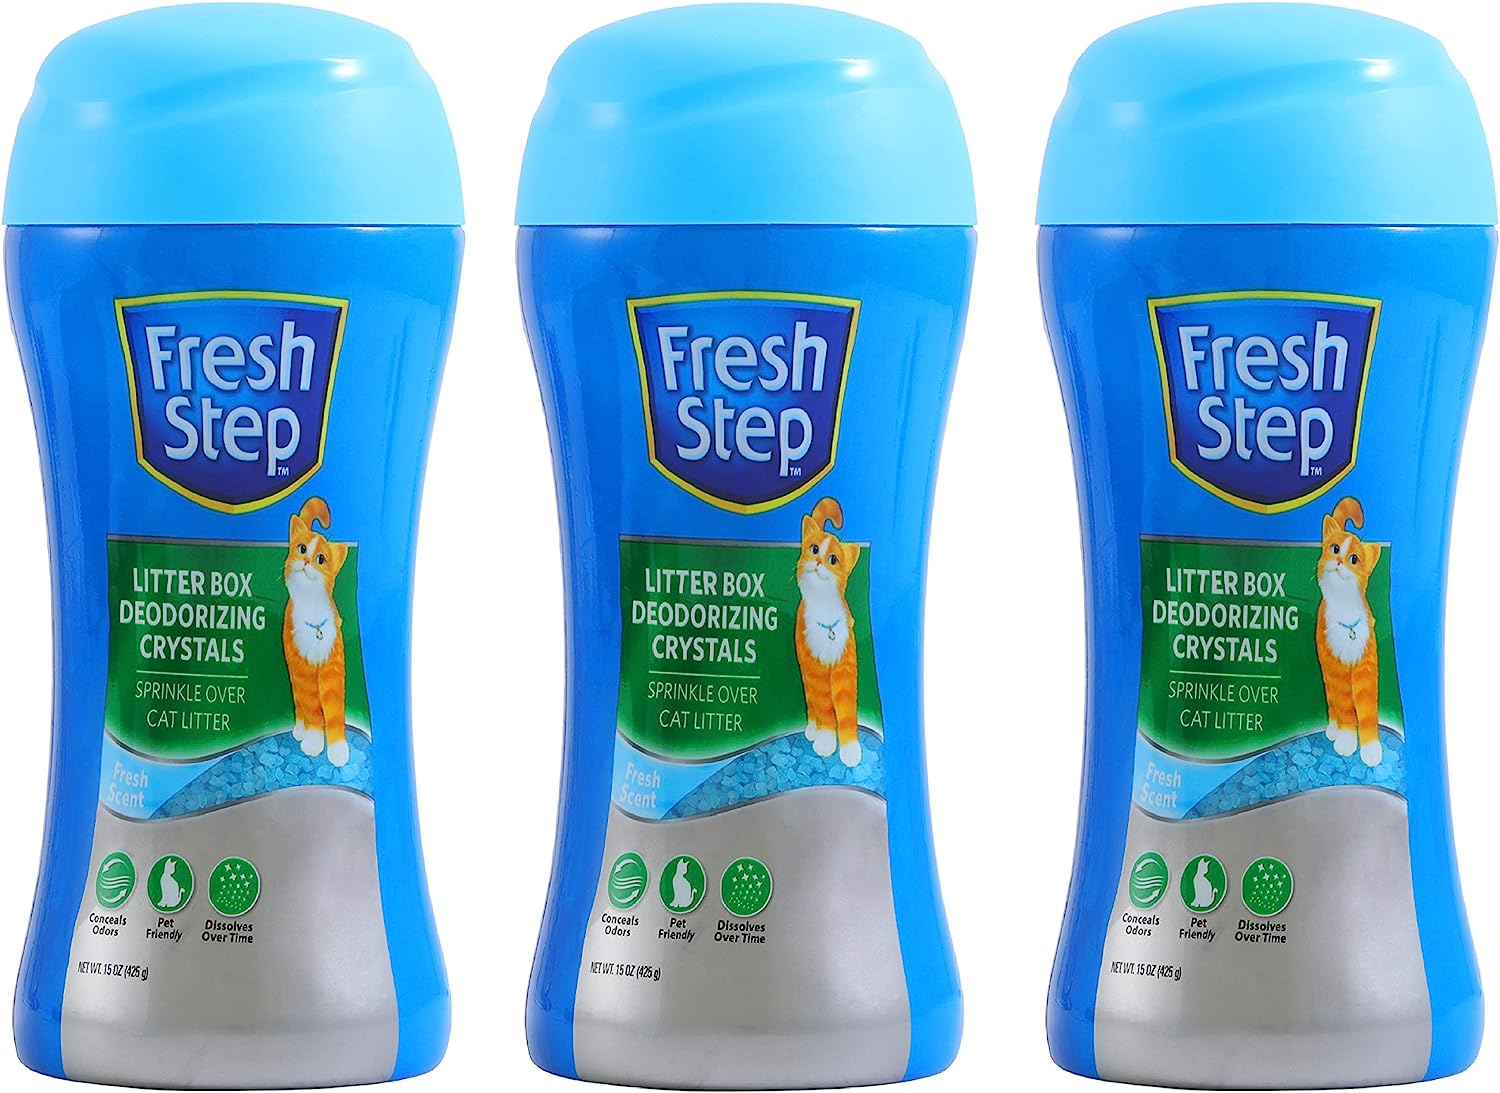 Fresh Step Cat Litter Crystals In Fresh Scent | Cat [...]